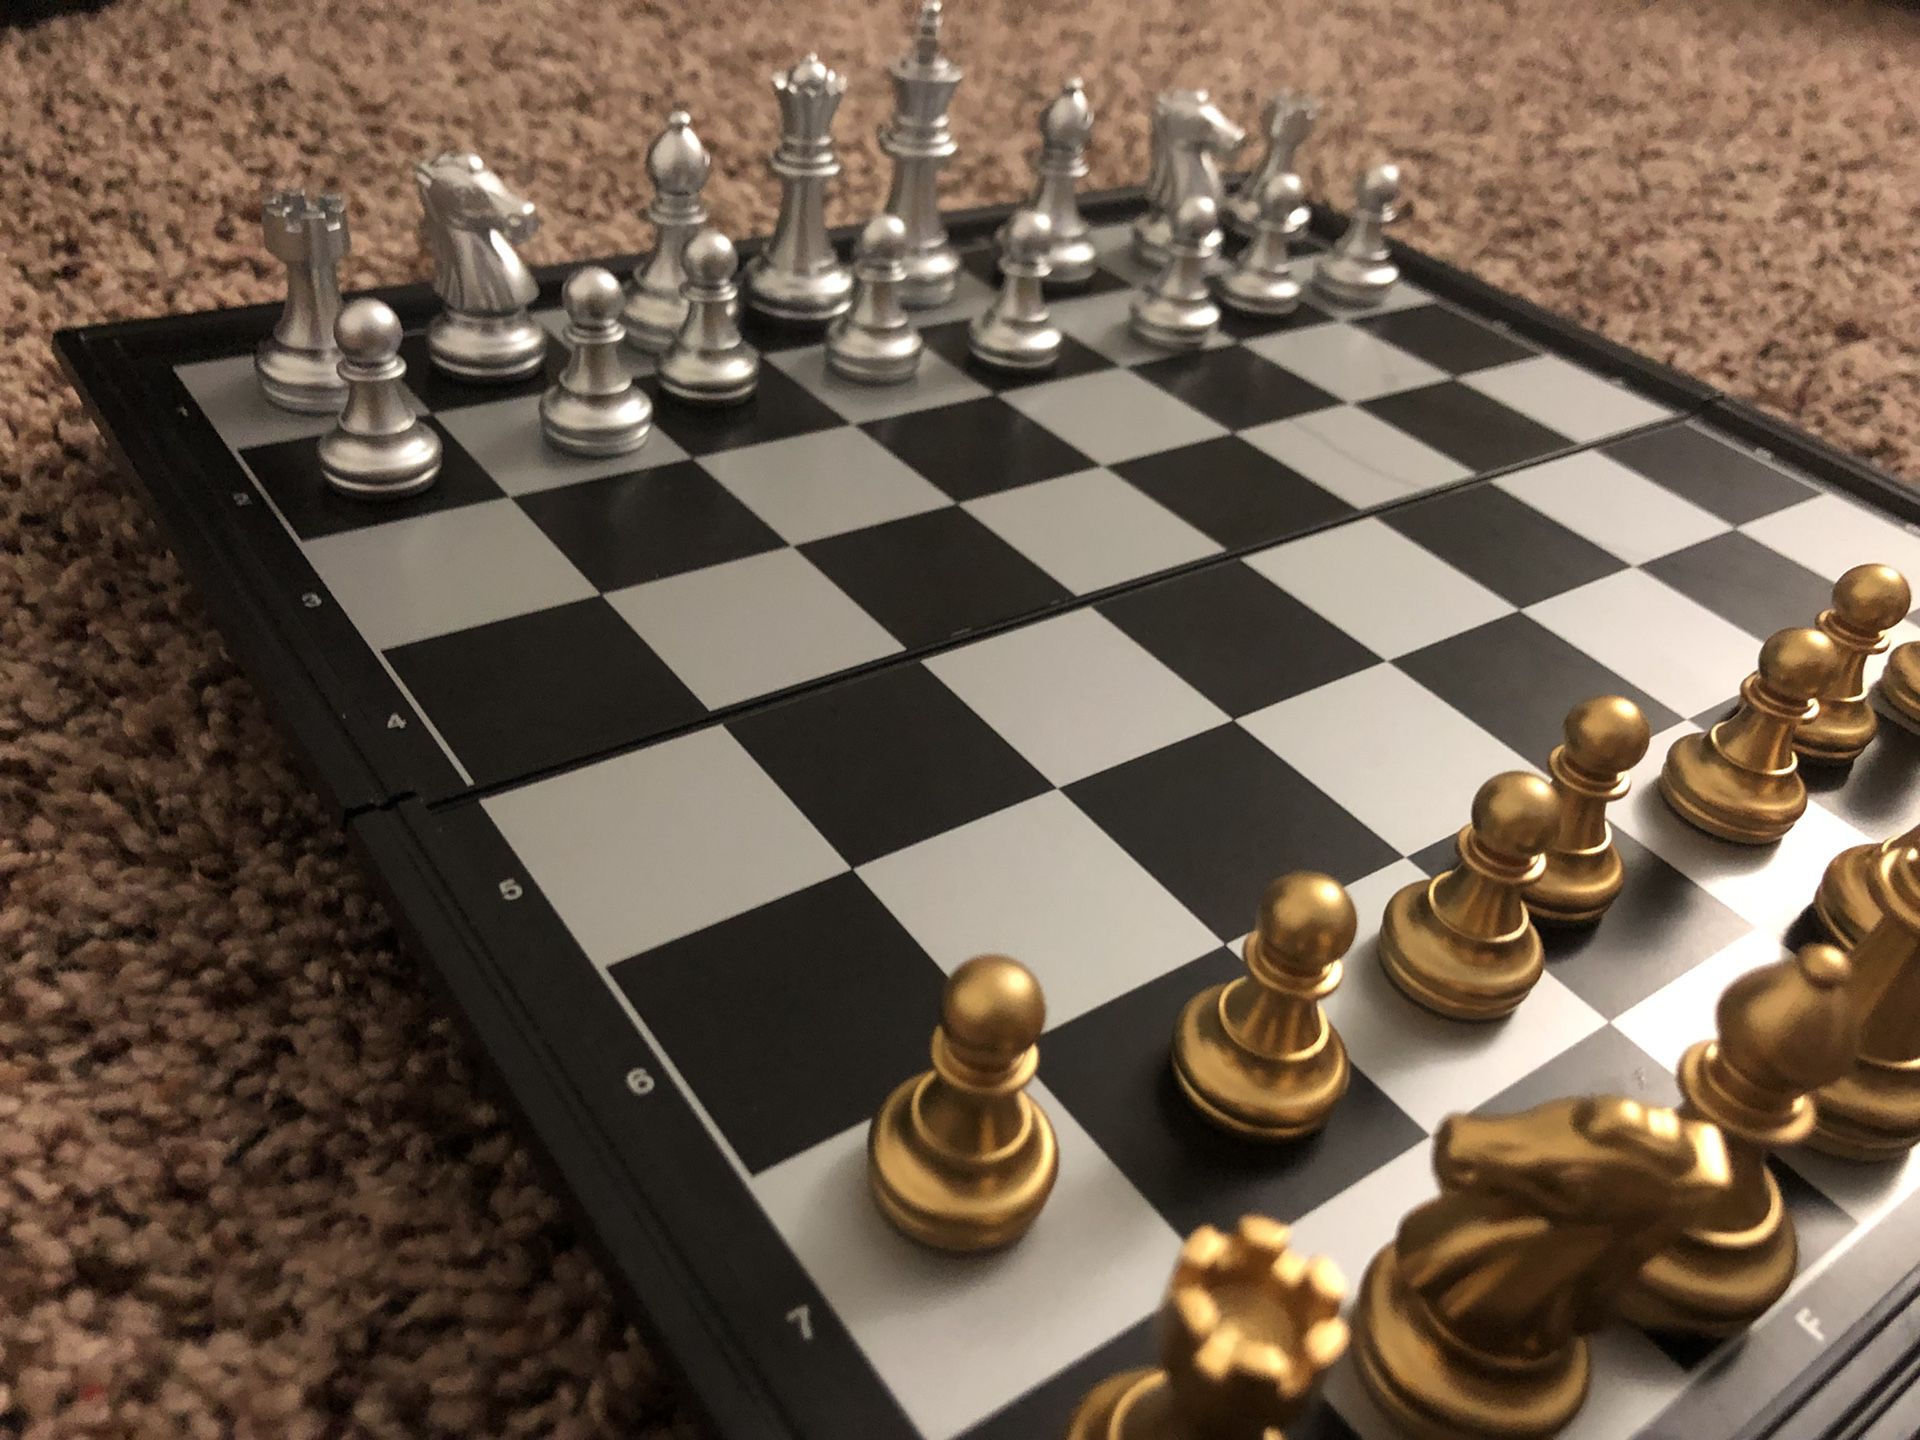 Magnetic Chess set